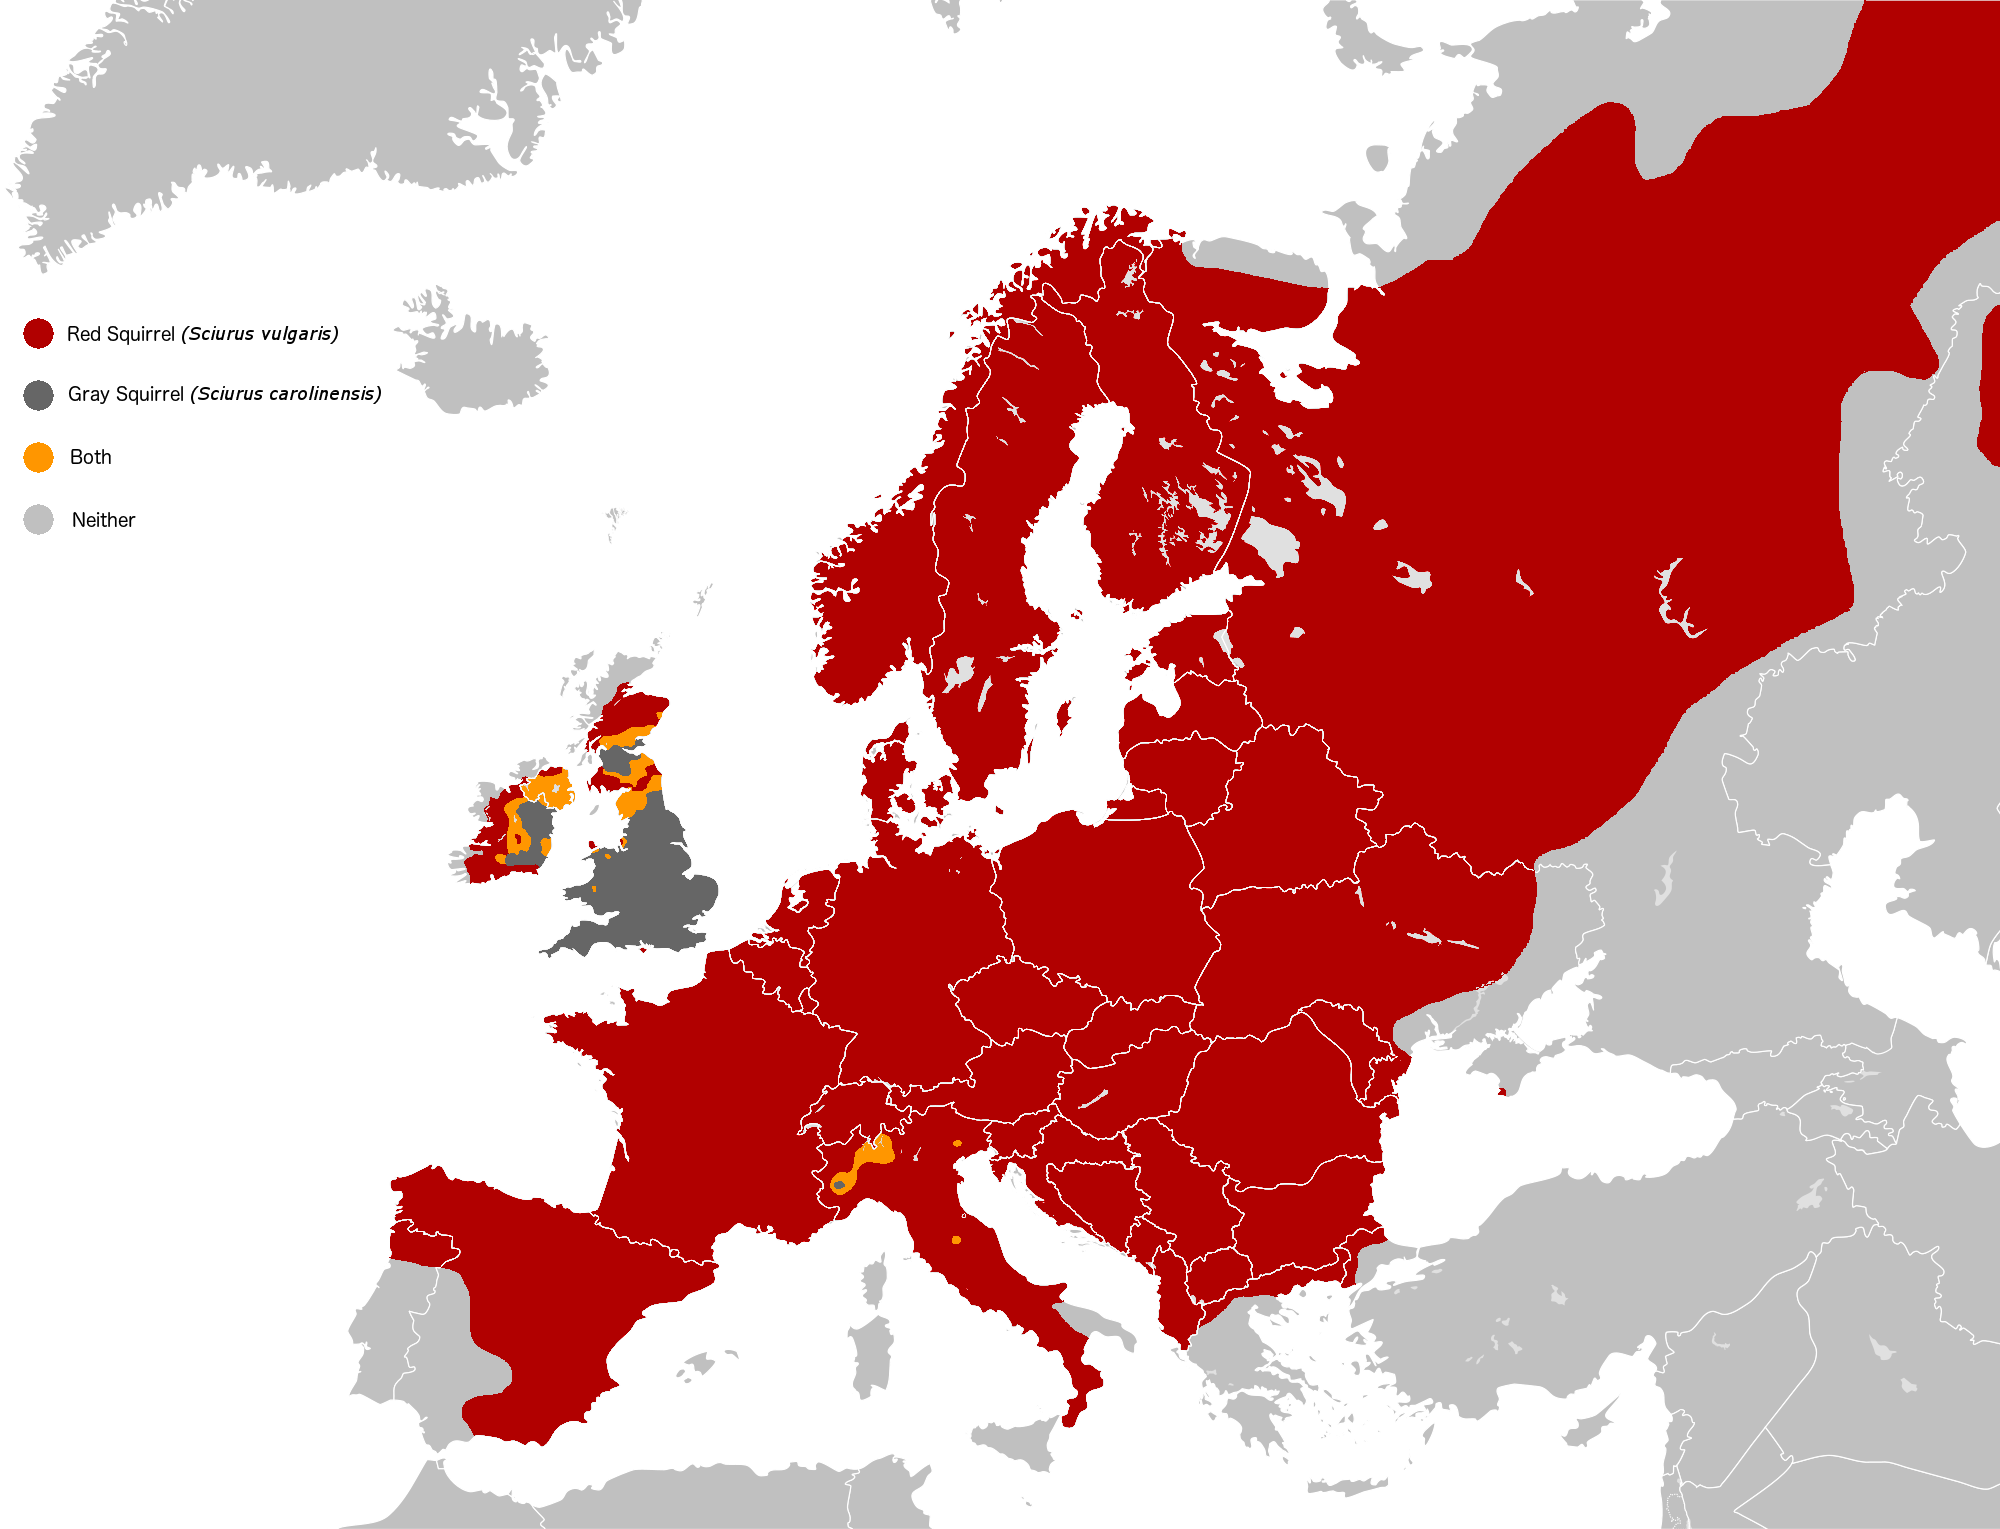 Red and gray squirrel dispersals in Europe